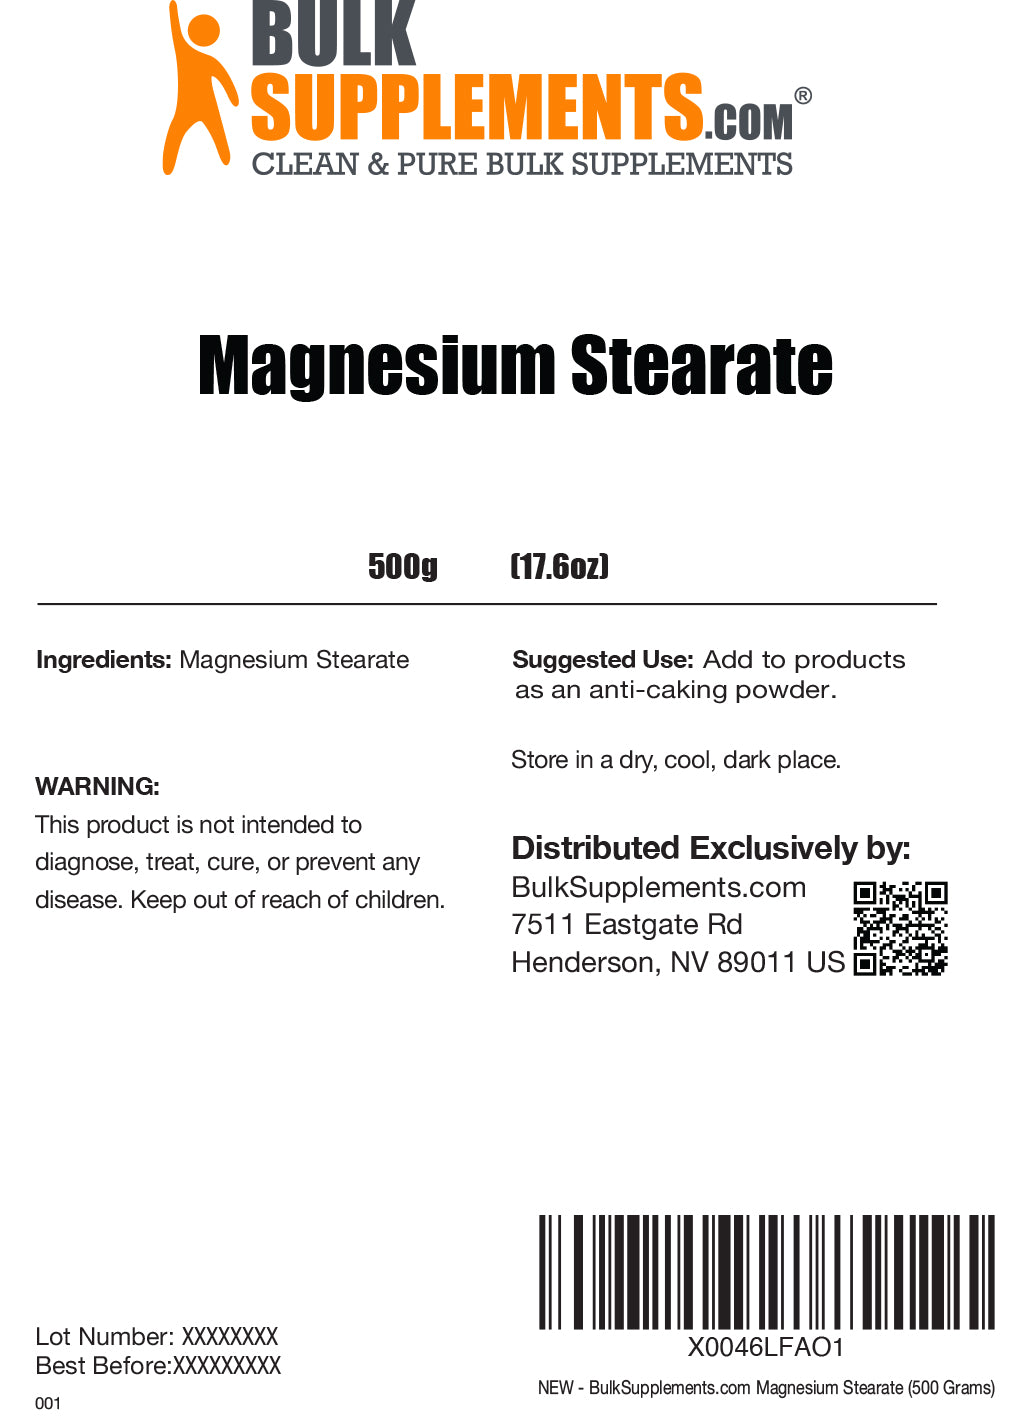 Magnesium stearate 500g label